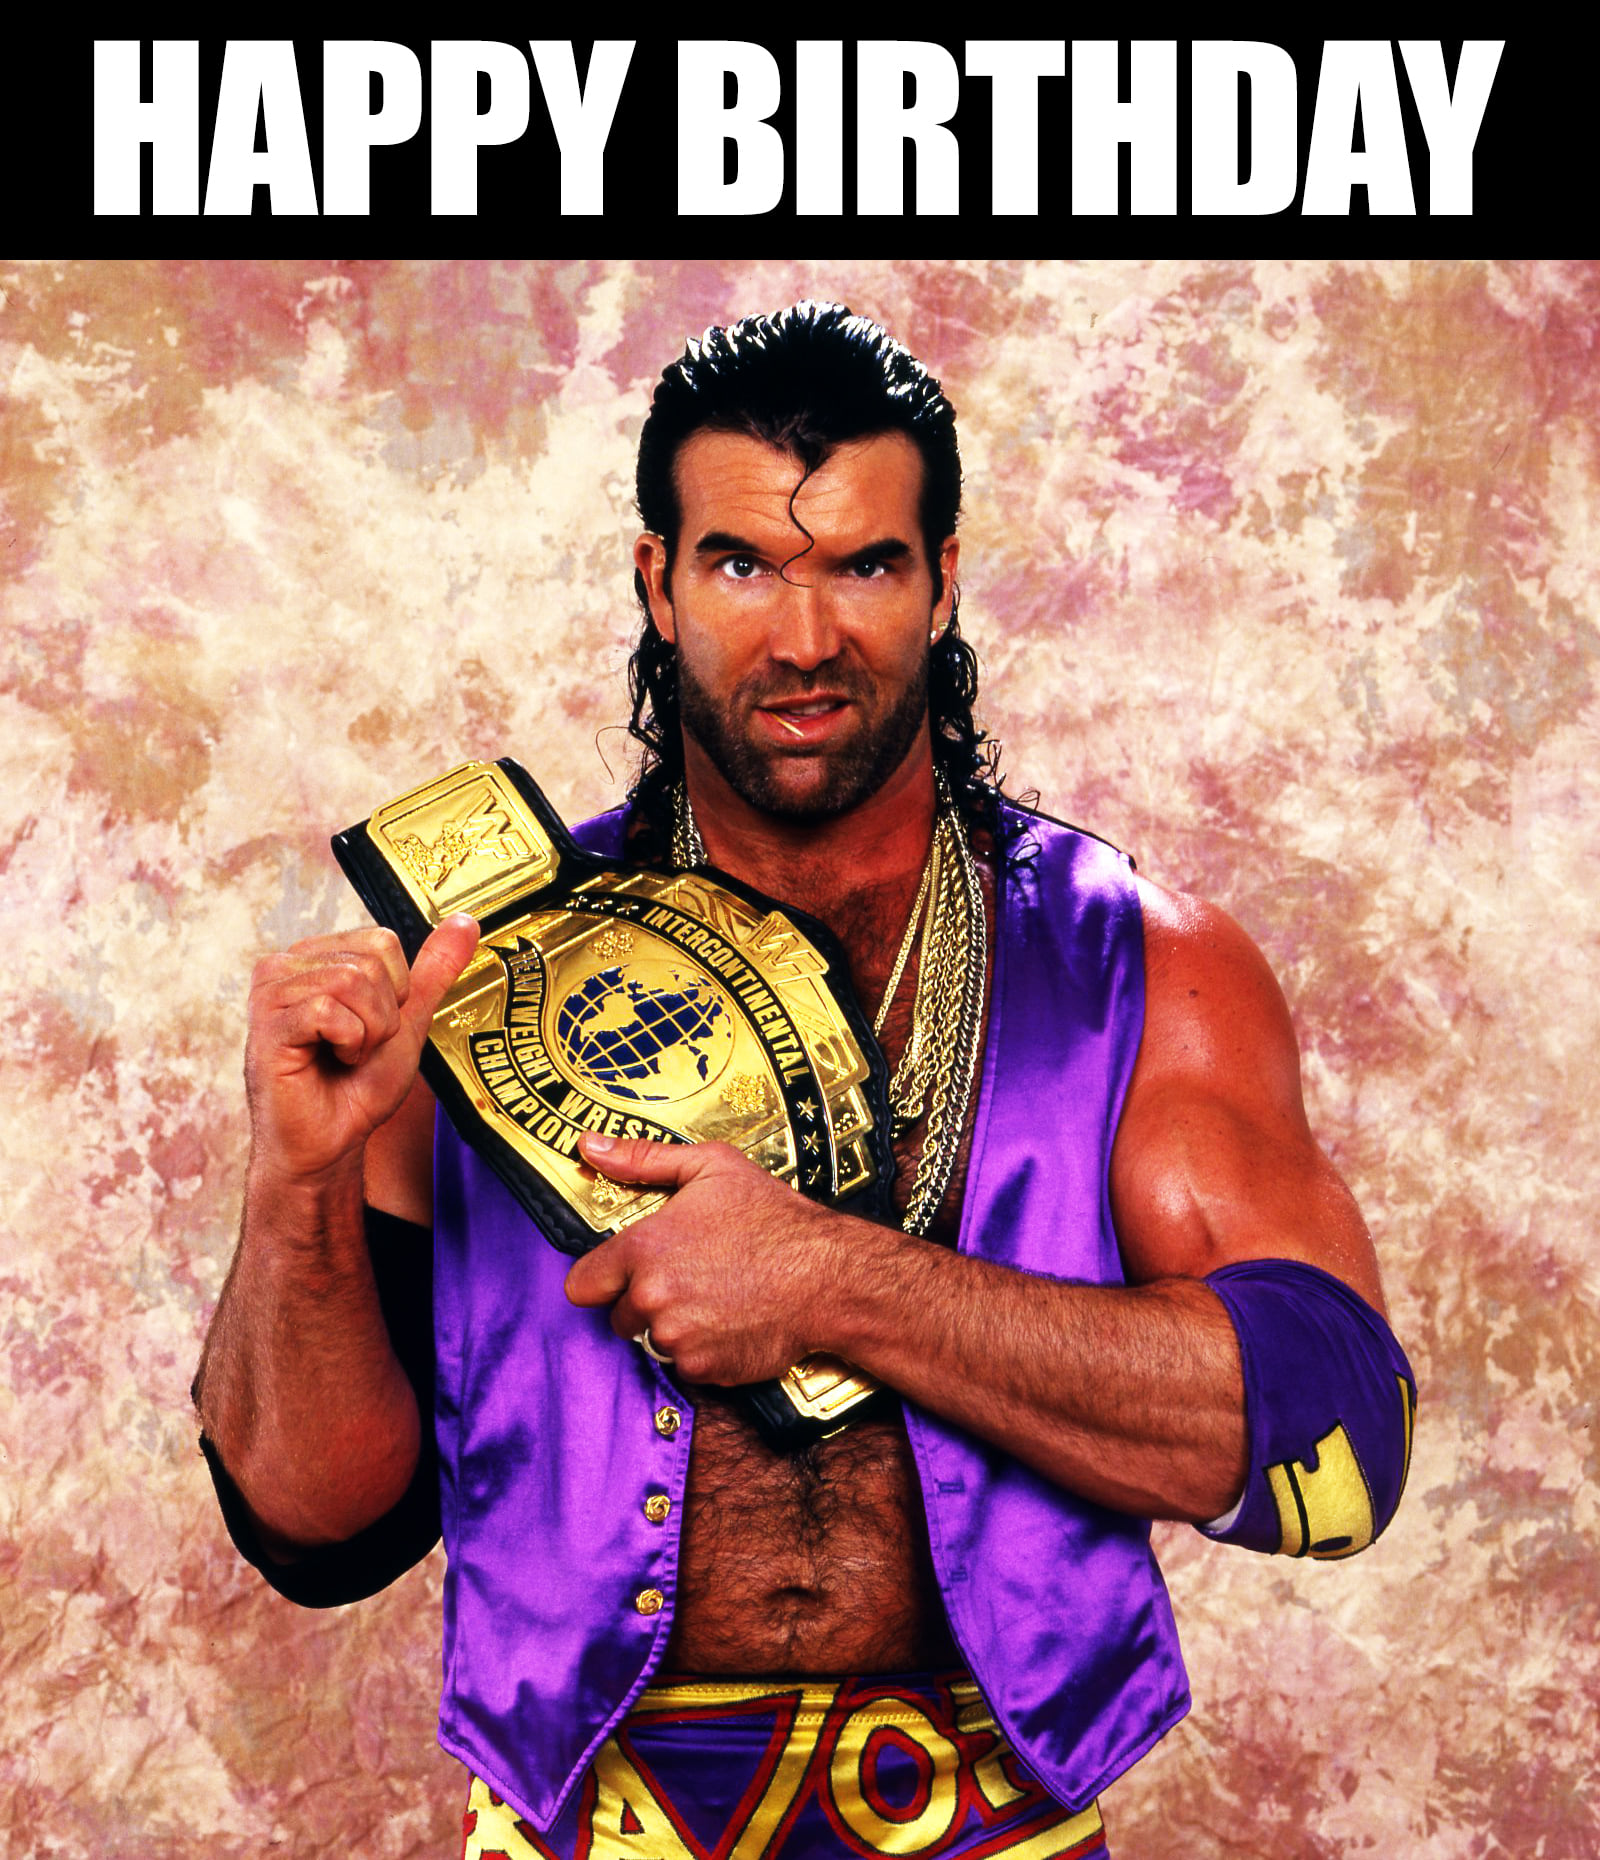 Today would have been the 64th birthday of Old School WWF Legend \"Razor Ramon\" Scott Hall.

Happy Birthday & RIP 